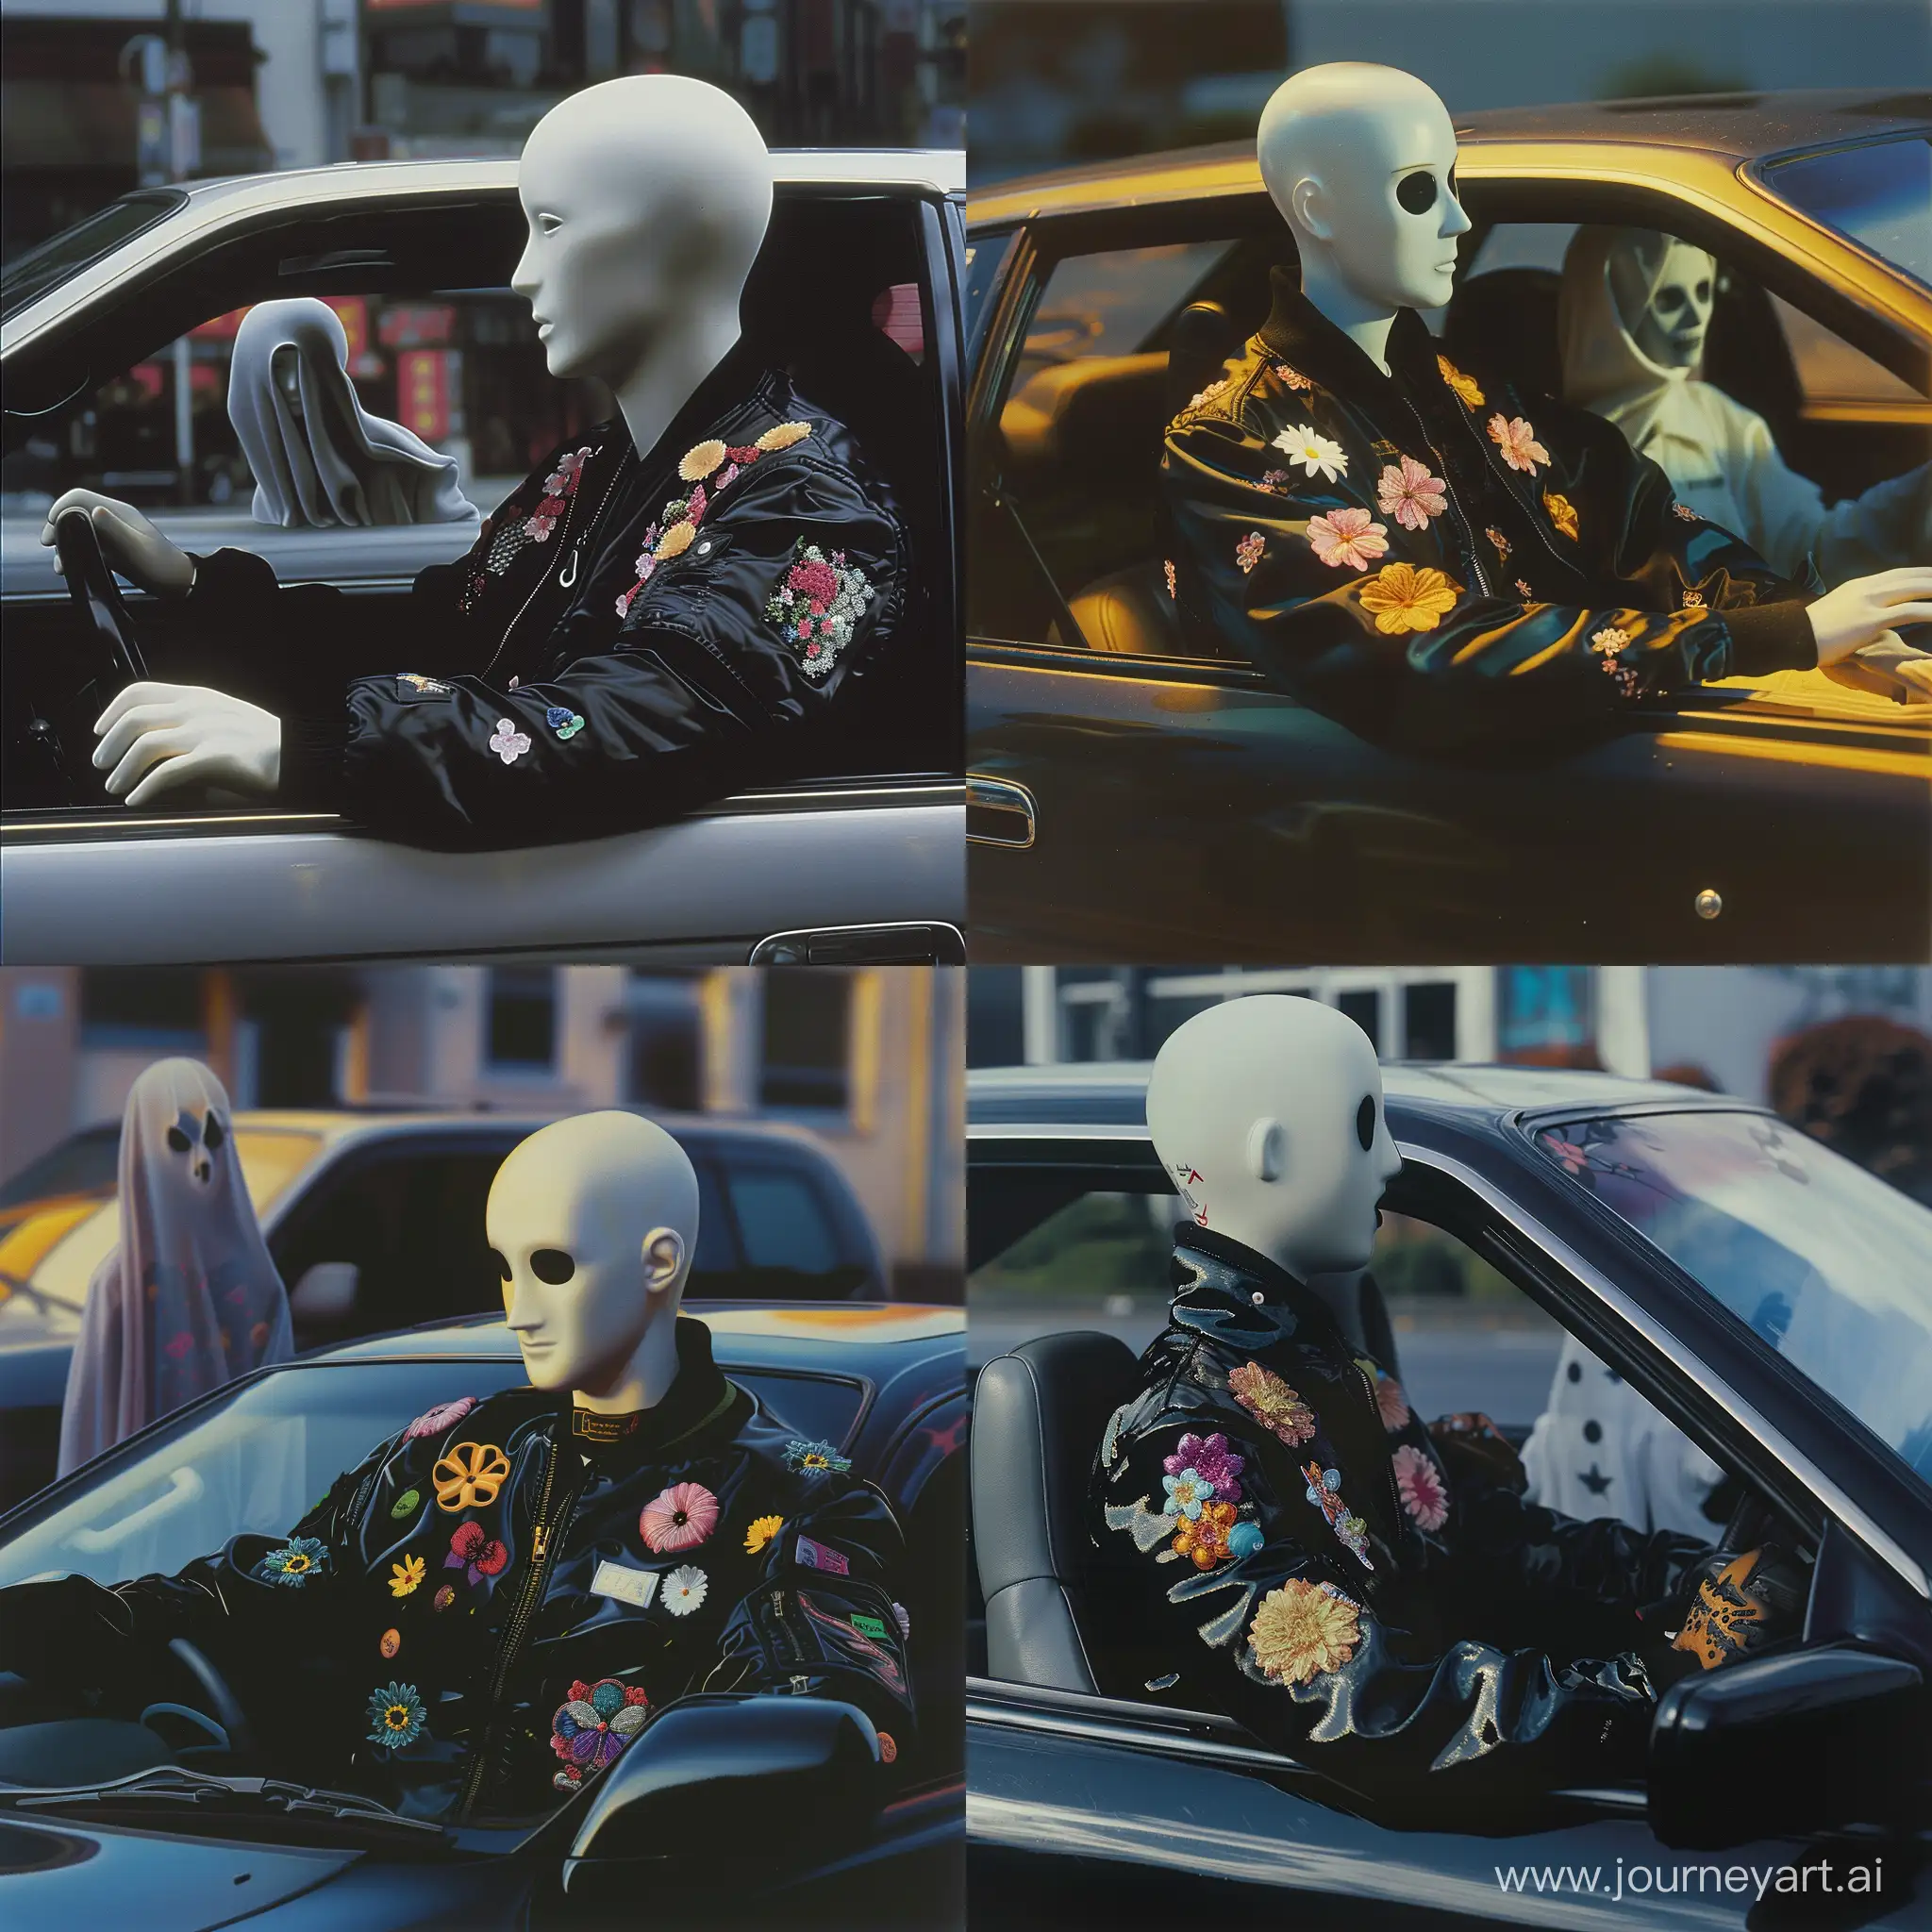 album art, antipop, 90s film, mannequin driving a japanese tuner car wearing a black jacket with flower patches, with a ghost riding in the passenger seat, realism